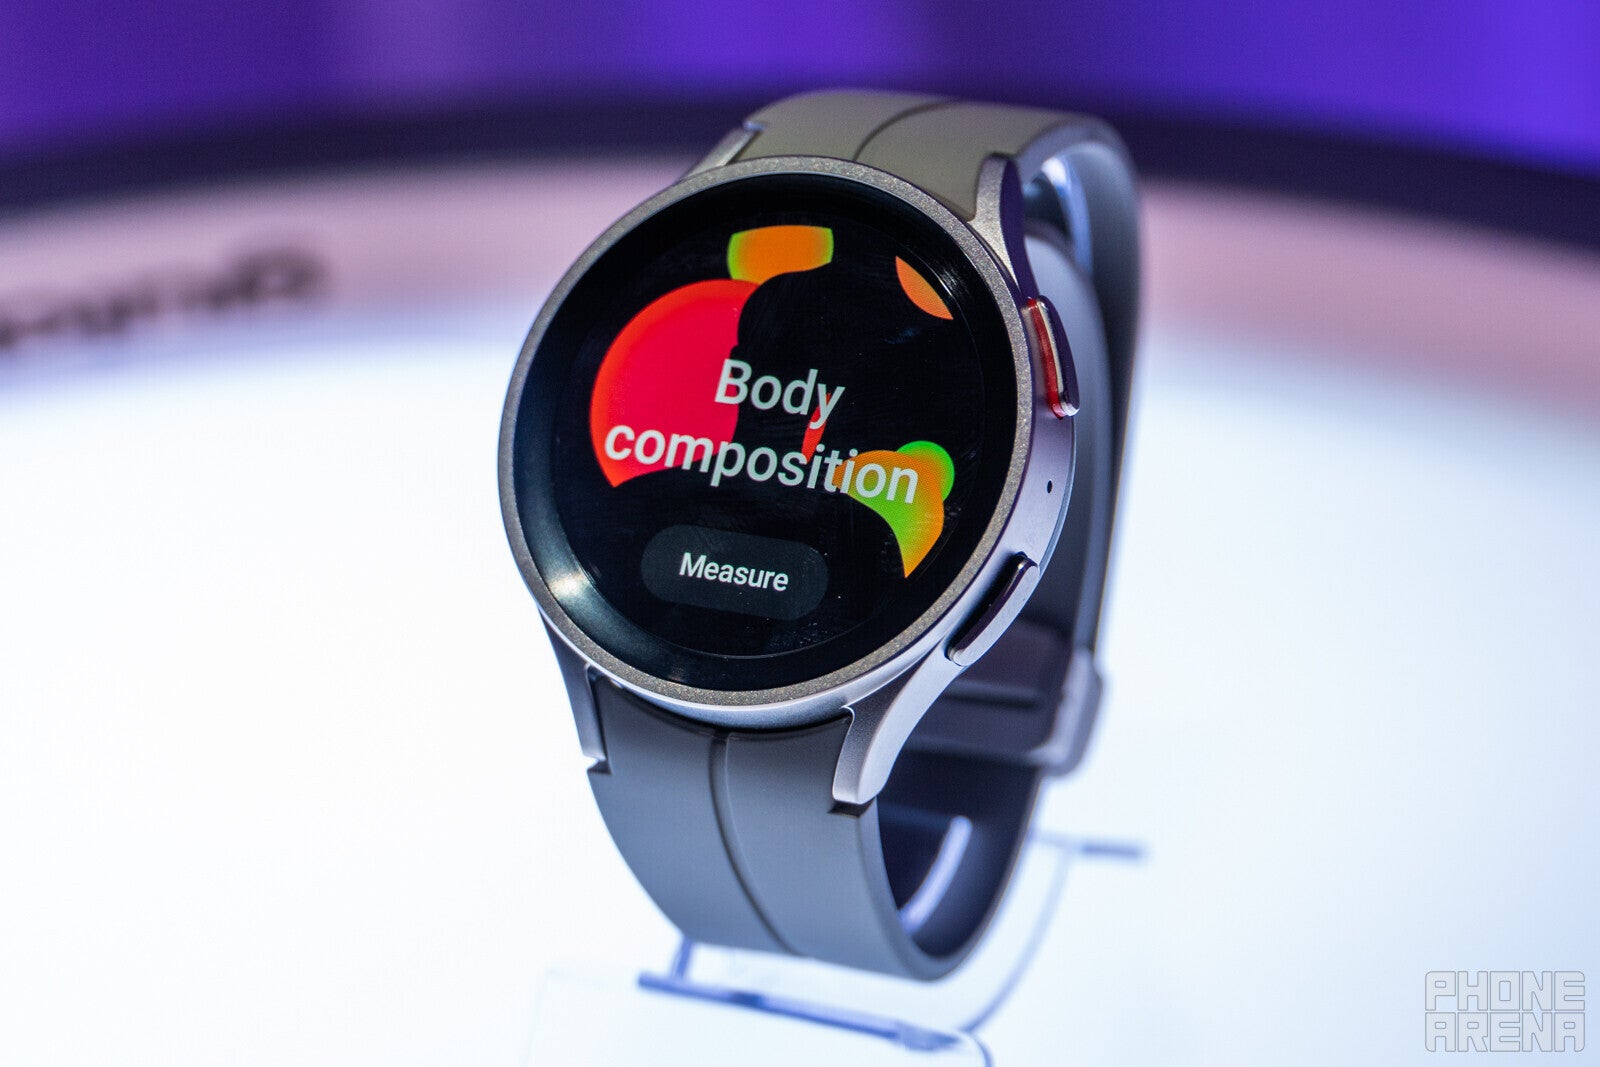 The Samsung Galaxy Watch 5 later this year should be able to provide Google Maps navigation without a phone nearby - Wear OS to provide navigation from Google Maps without a phone nearby